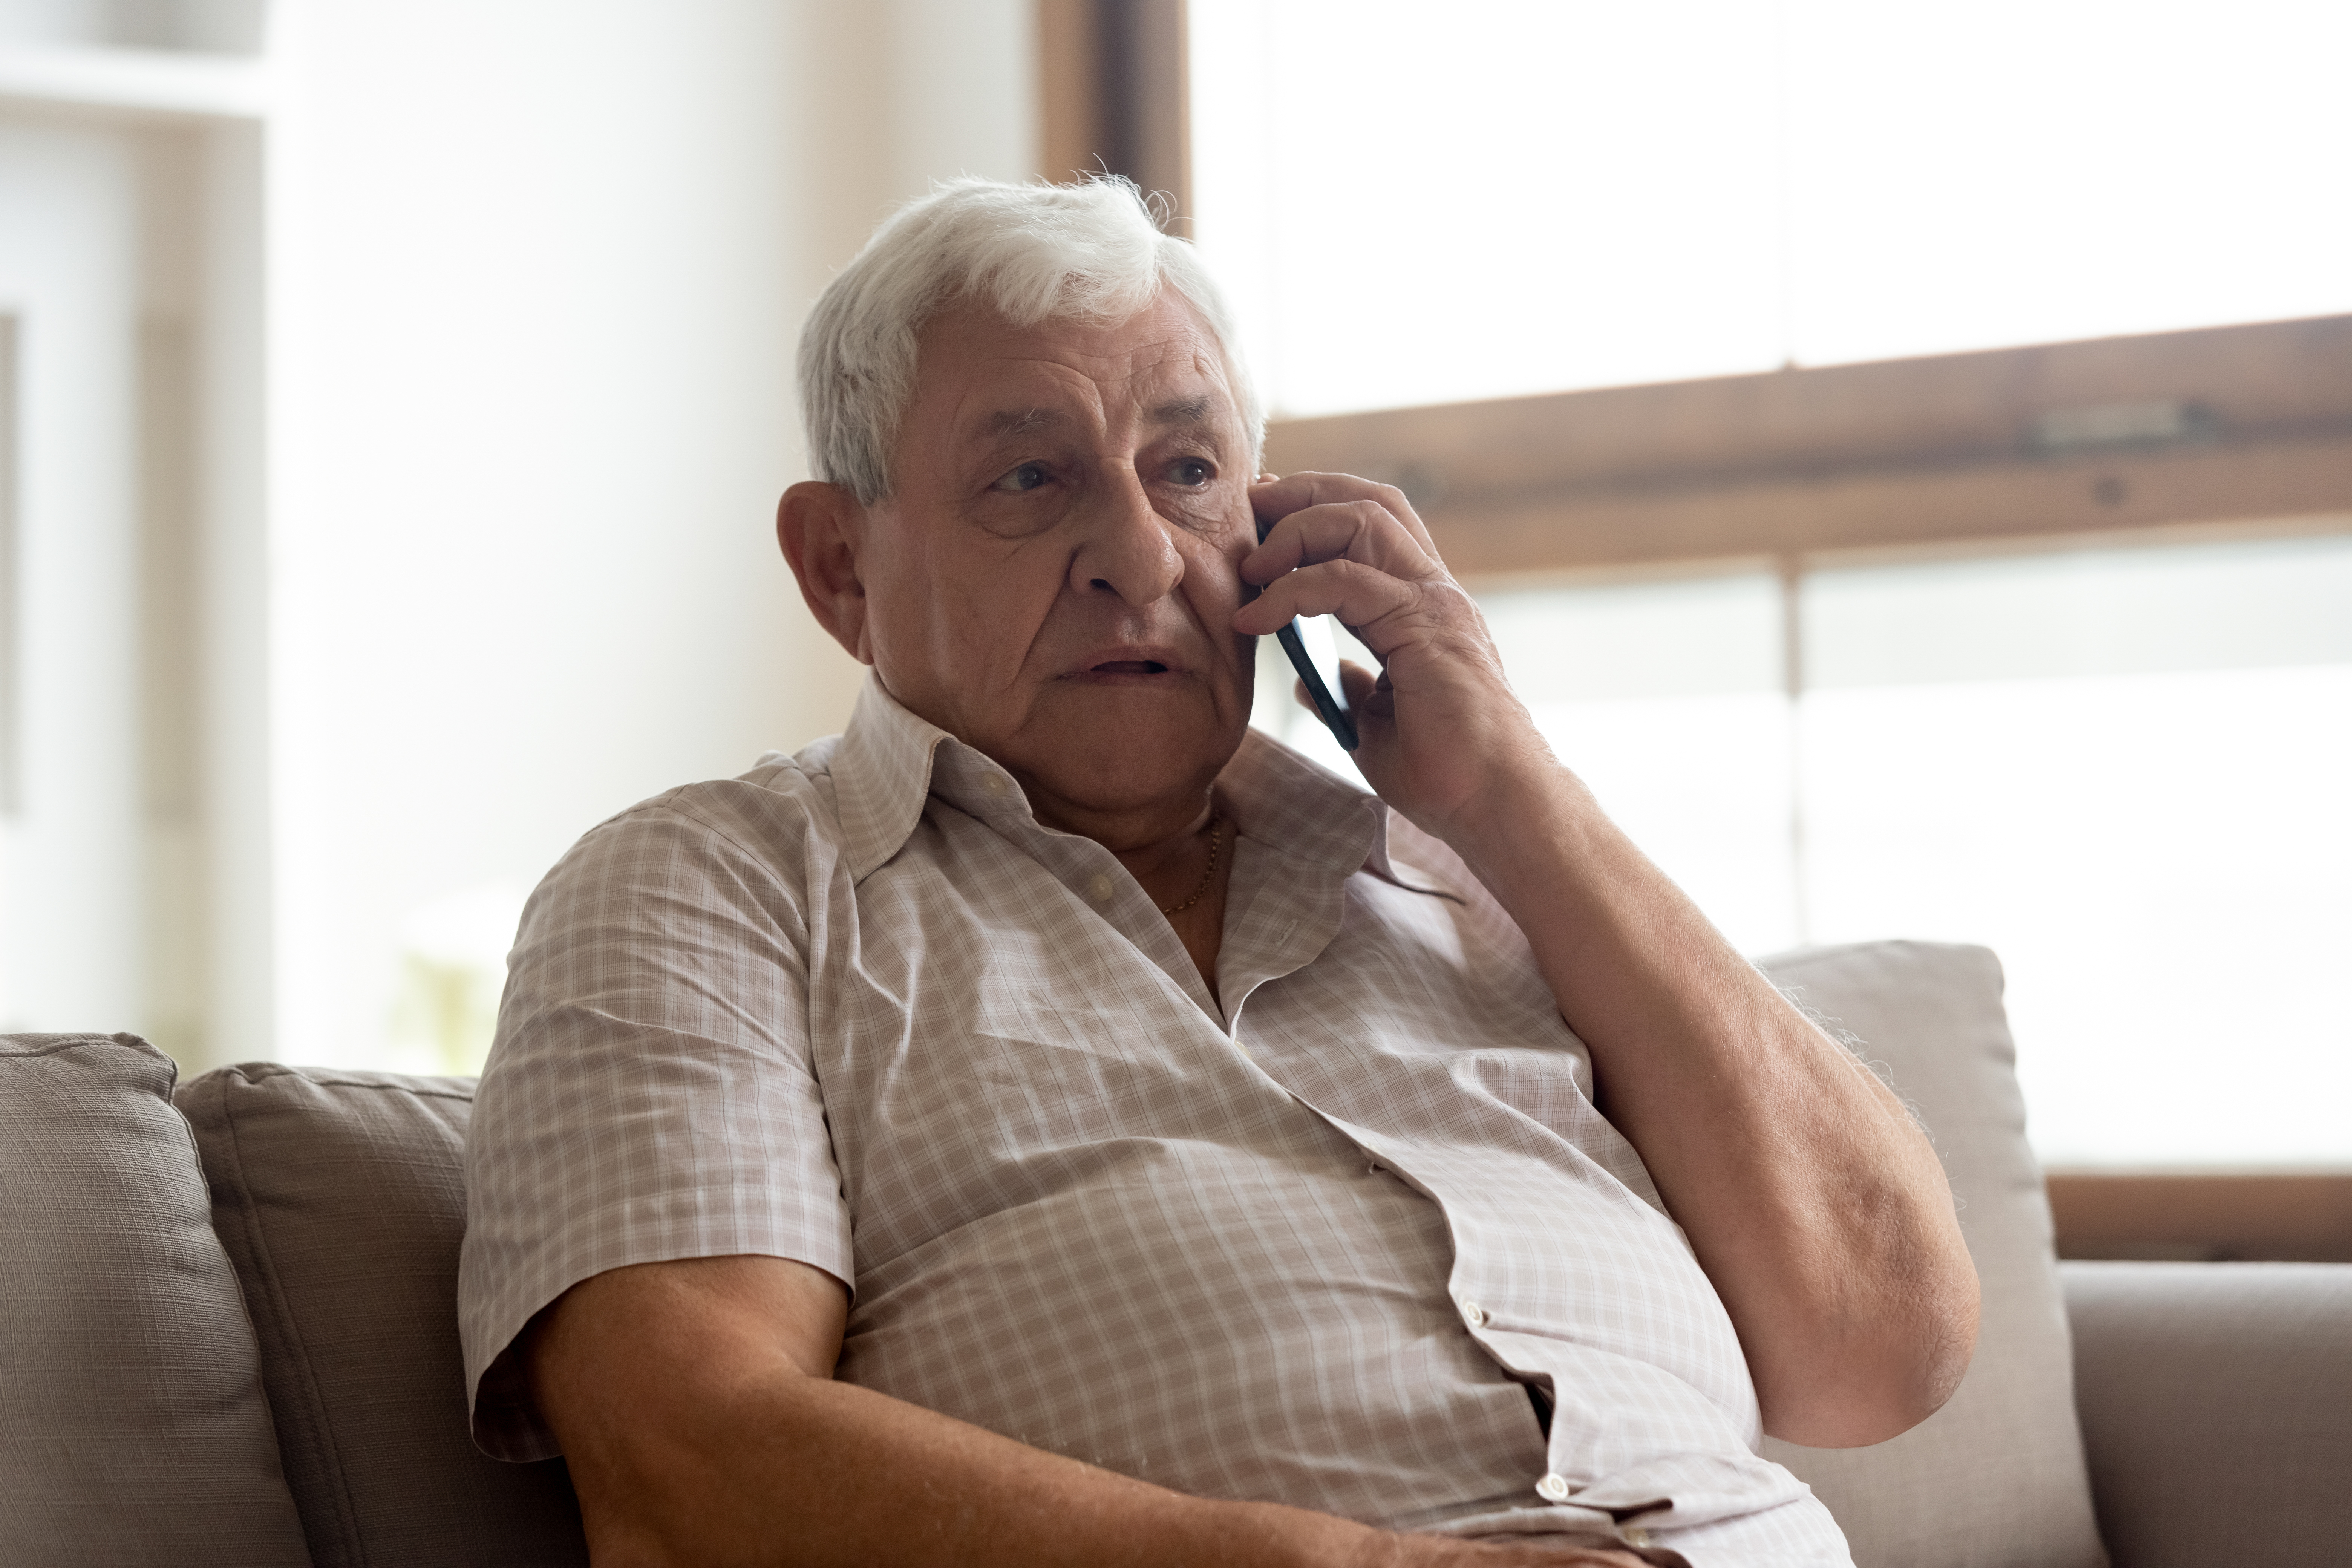 An older man talking on his phone | Source: Shutterstock